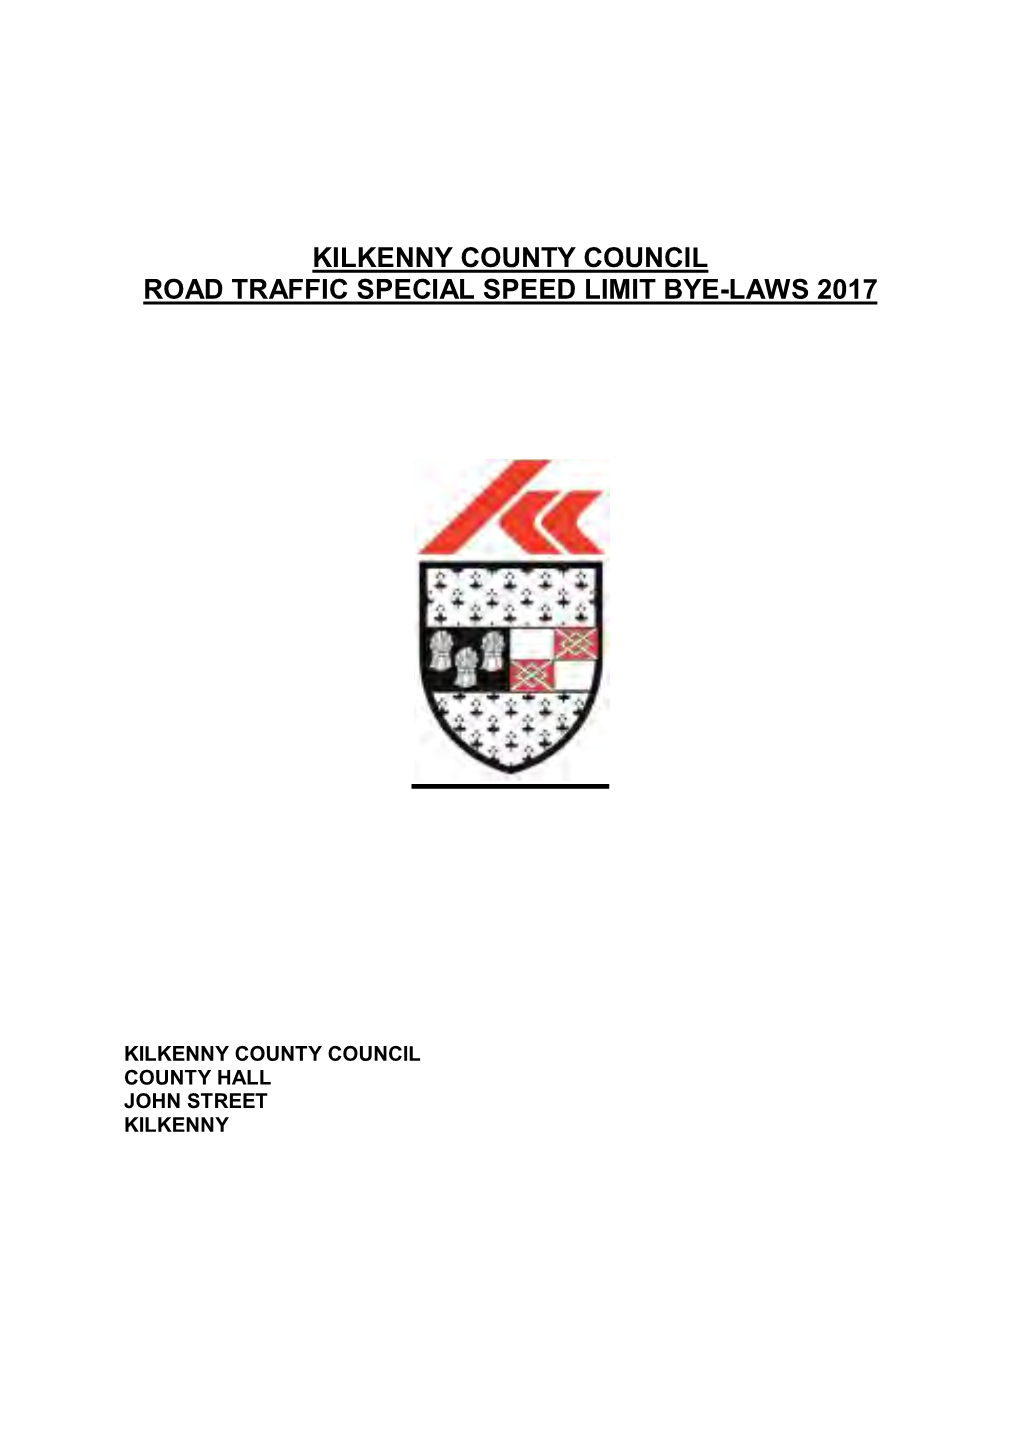 Kilkenny County Council Road Traffic Special Speed Limit Bye-Laws 2017